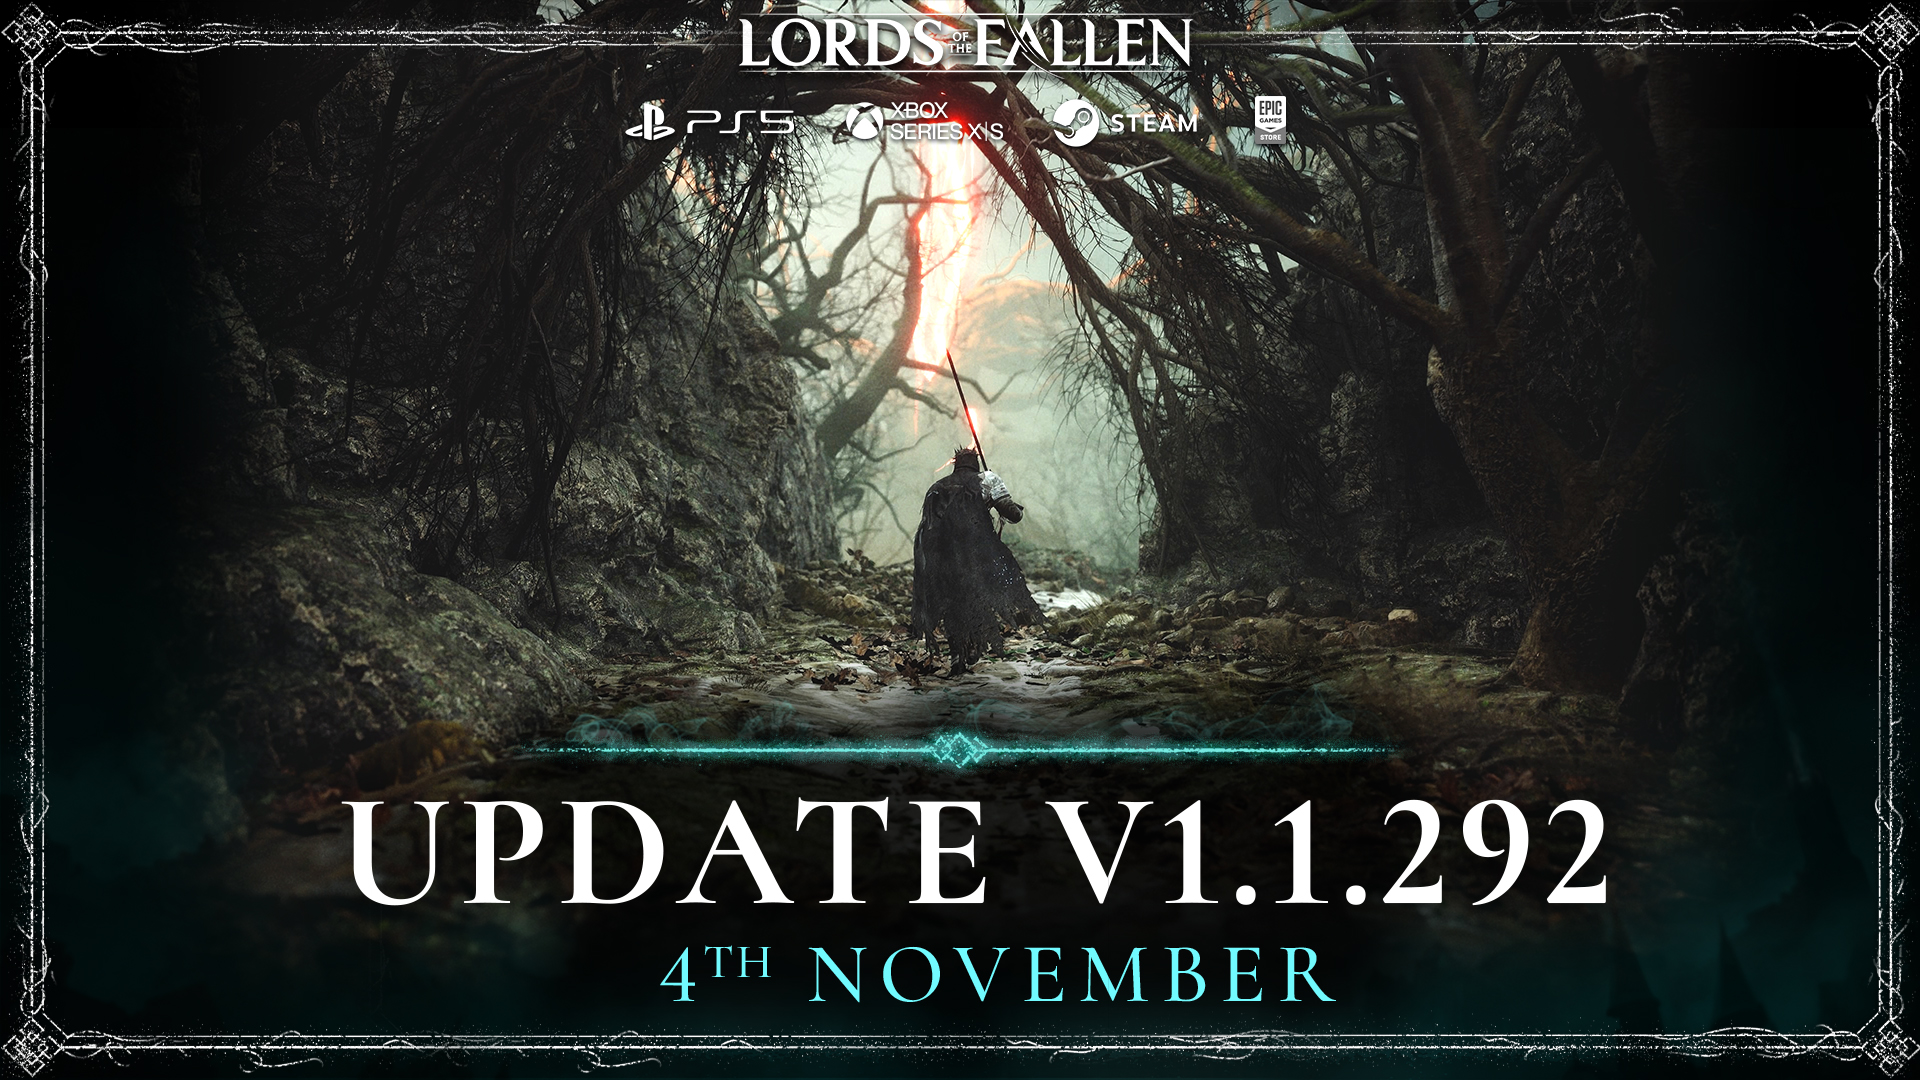 LORDS OF THE FALLEN on X: Update v.1.1.292 is now live on all